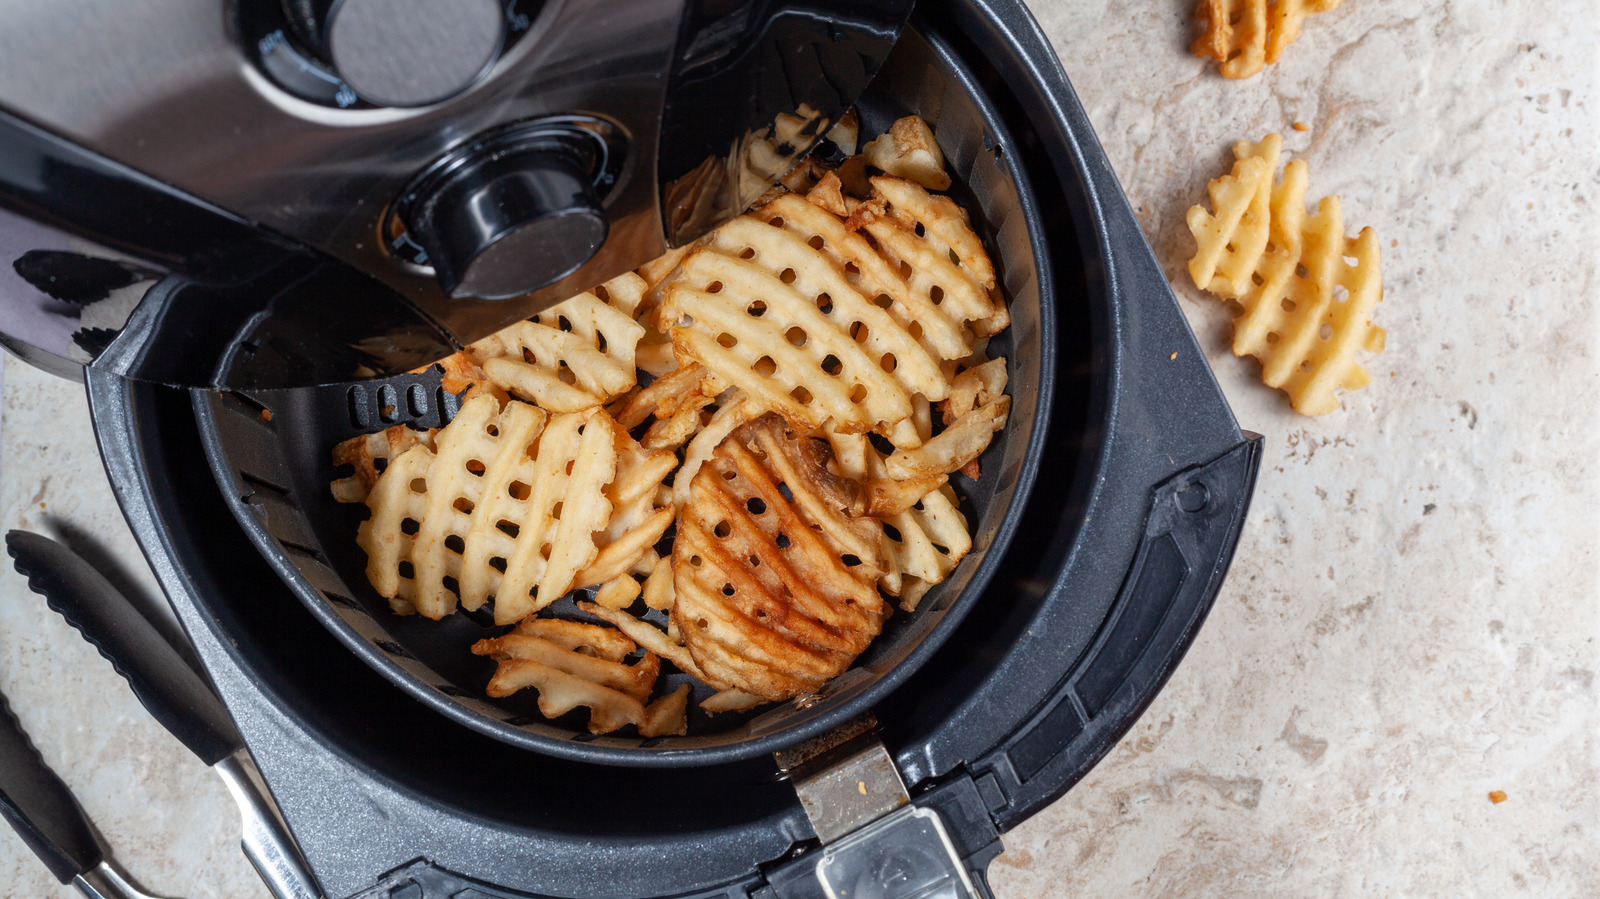 https://www.tastingtable.com/img/gallery/why-you-should-own-silicone-liners-for-your-air-fryer/l-intro-1678141957.jpg